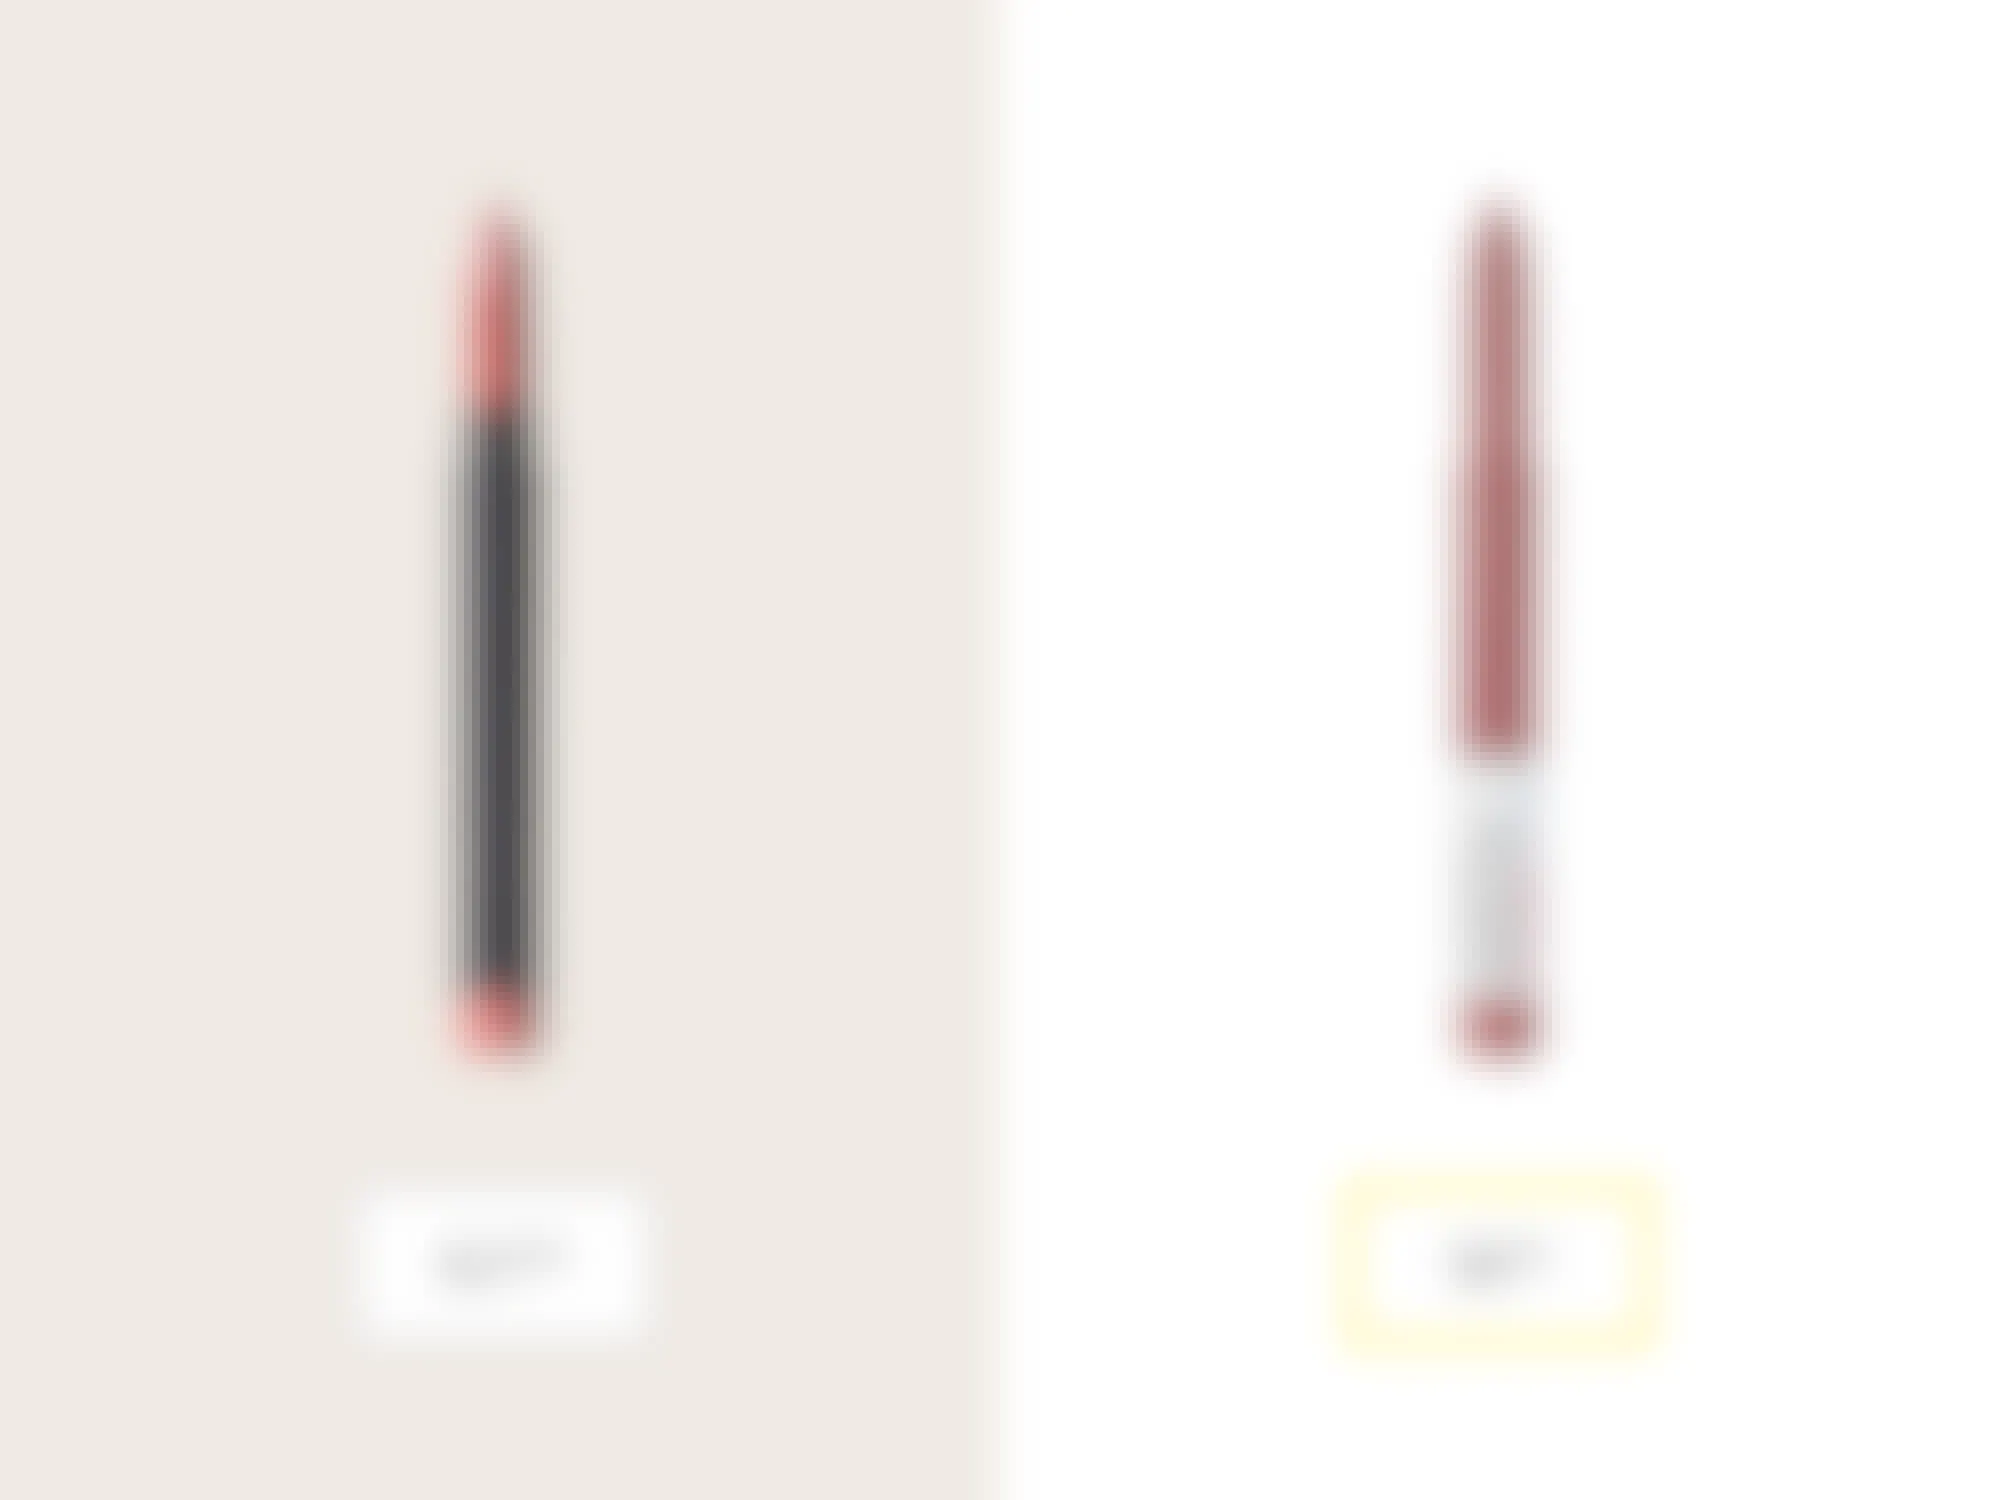 bite beauty creme lip crayon and maybelline superstay ink crayon price comparison graphic